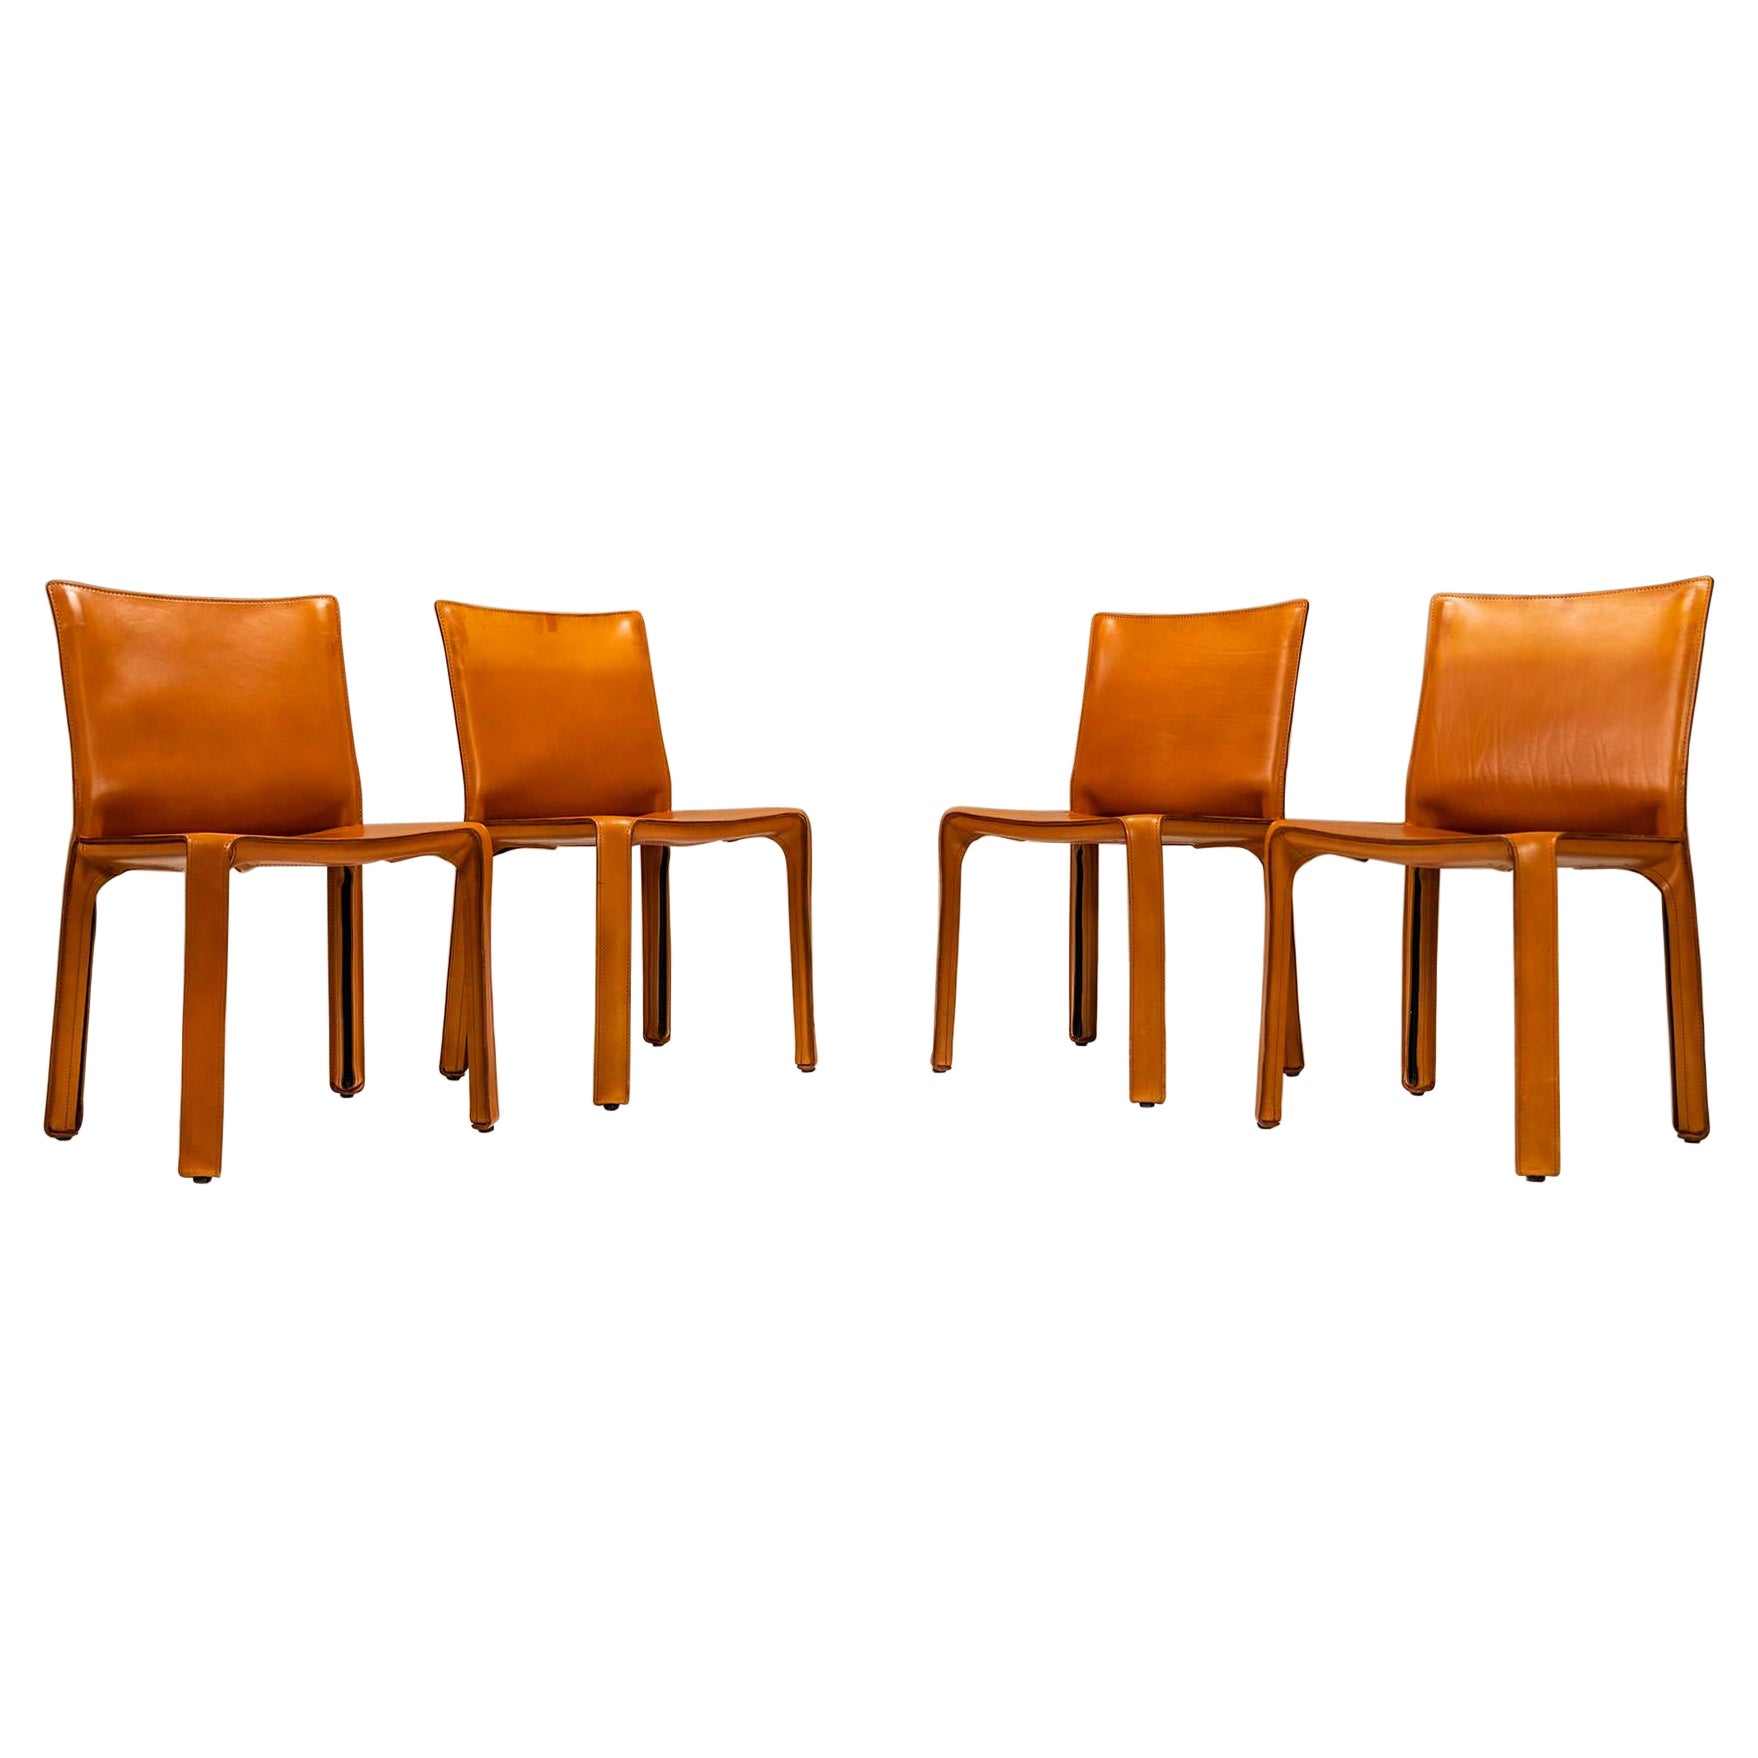 Set of 4 'CAB' Chairs in Cognac Leather by Mario Bellini for Cassina, Italy 1977